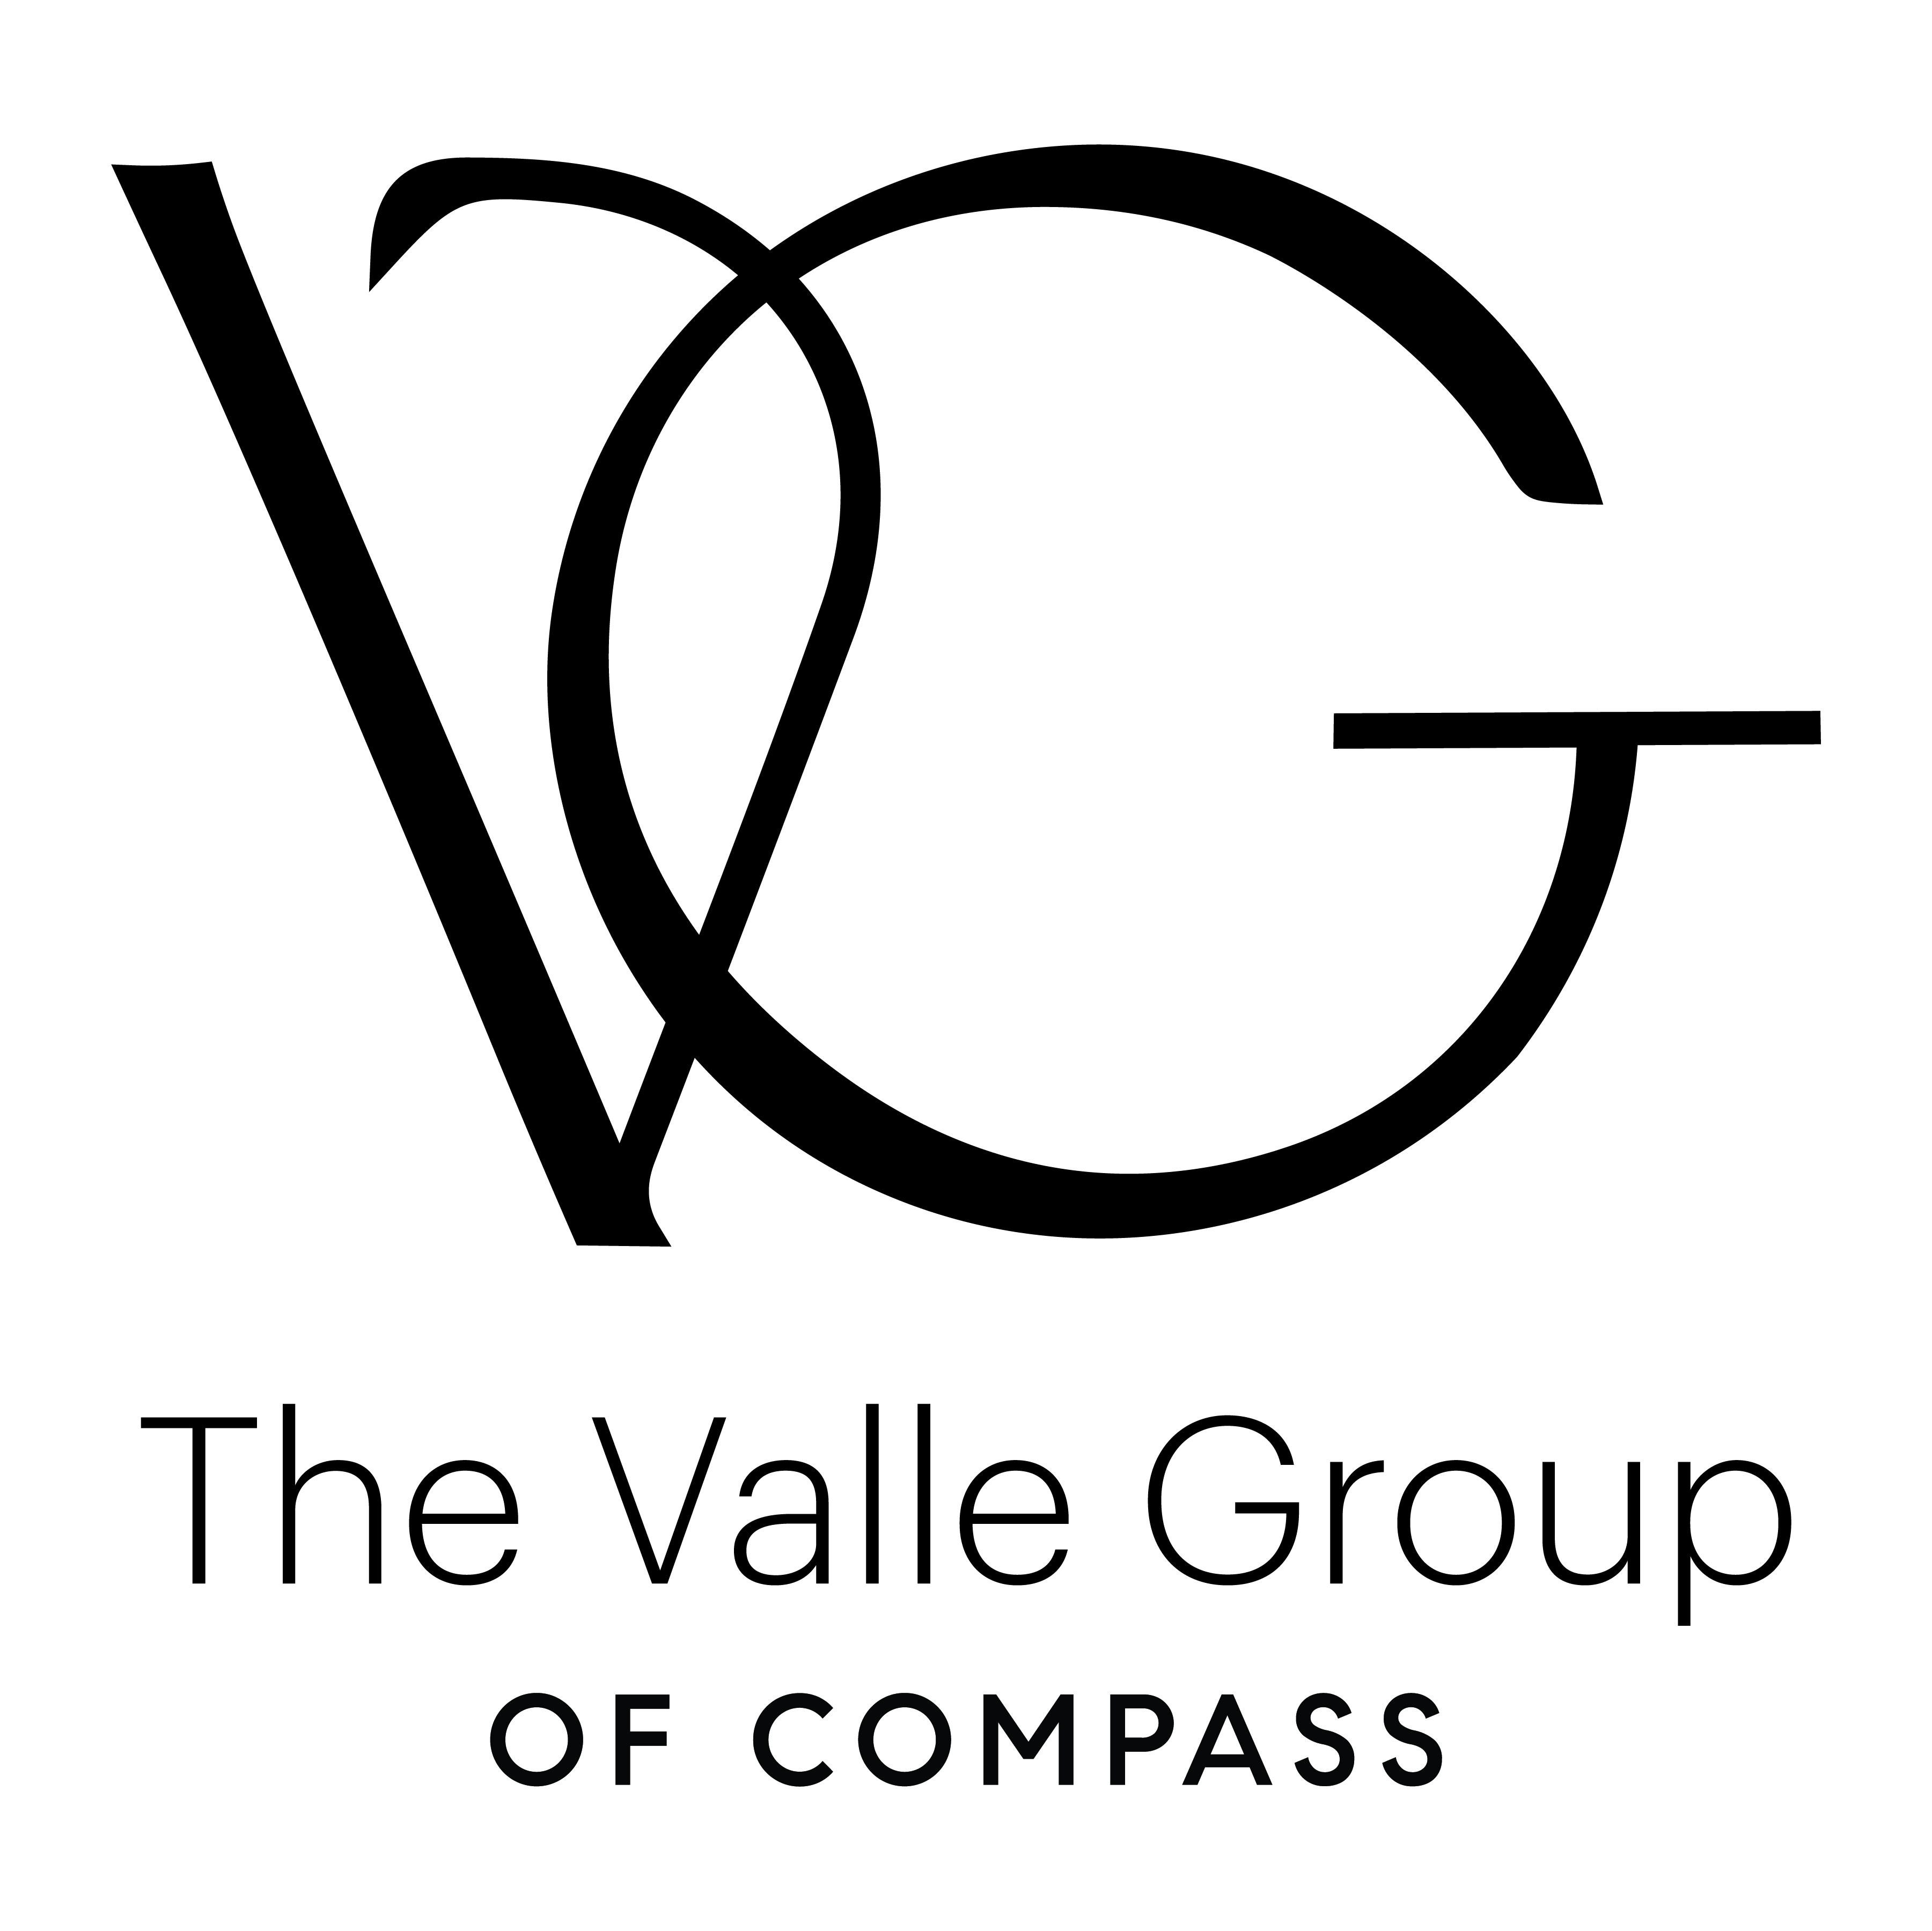 A text banner for The Valle Group